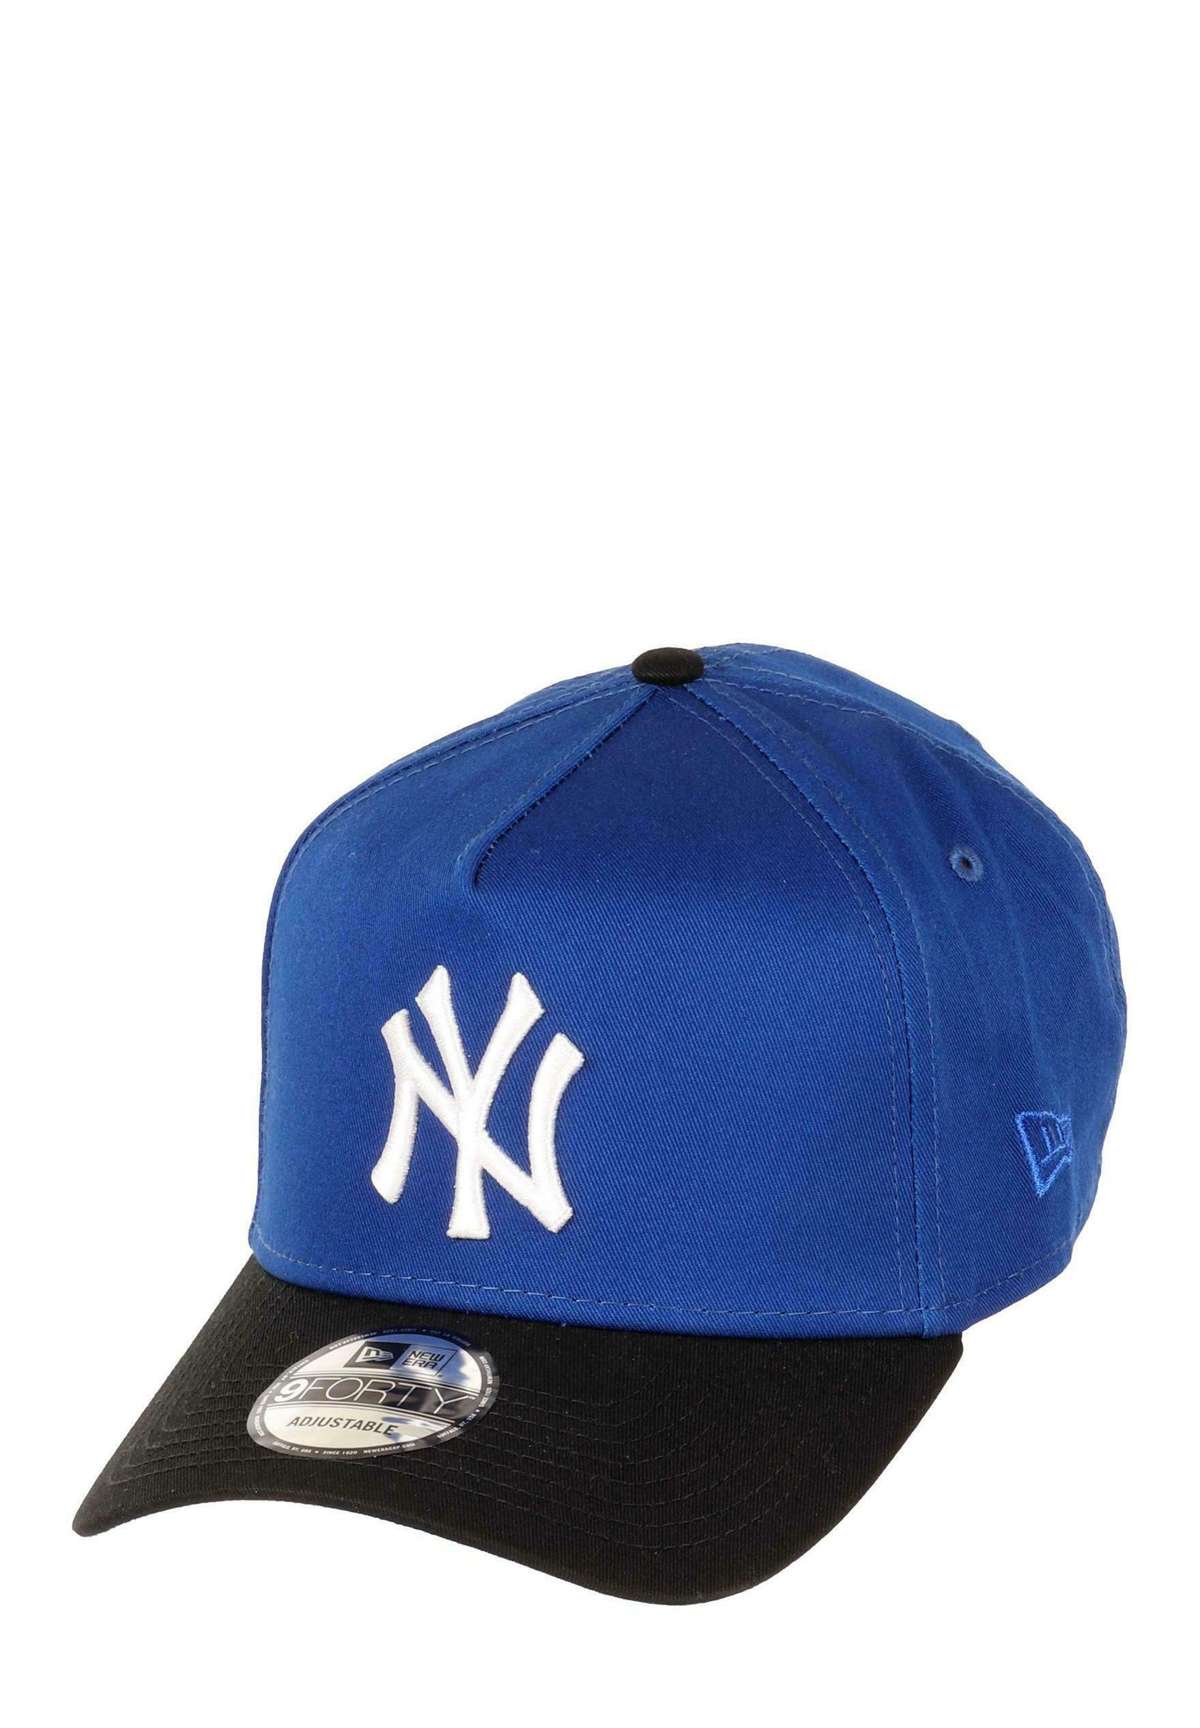 Кепка NEW YORK YANKEES MLB WORLD SERIES SIDEPATCH COOPERSTOWN SKY 9FORTY A-FRAME SNAPBACK